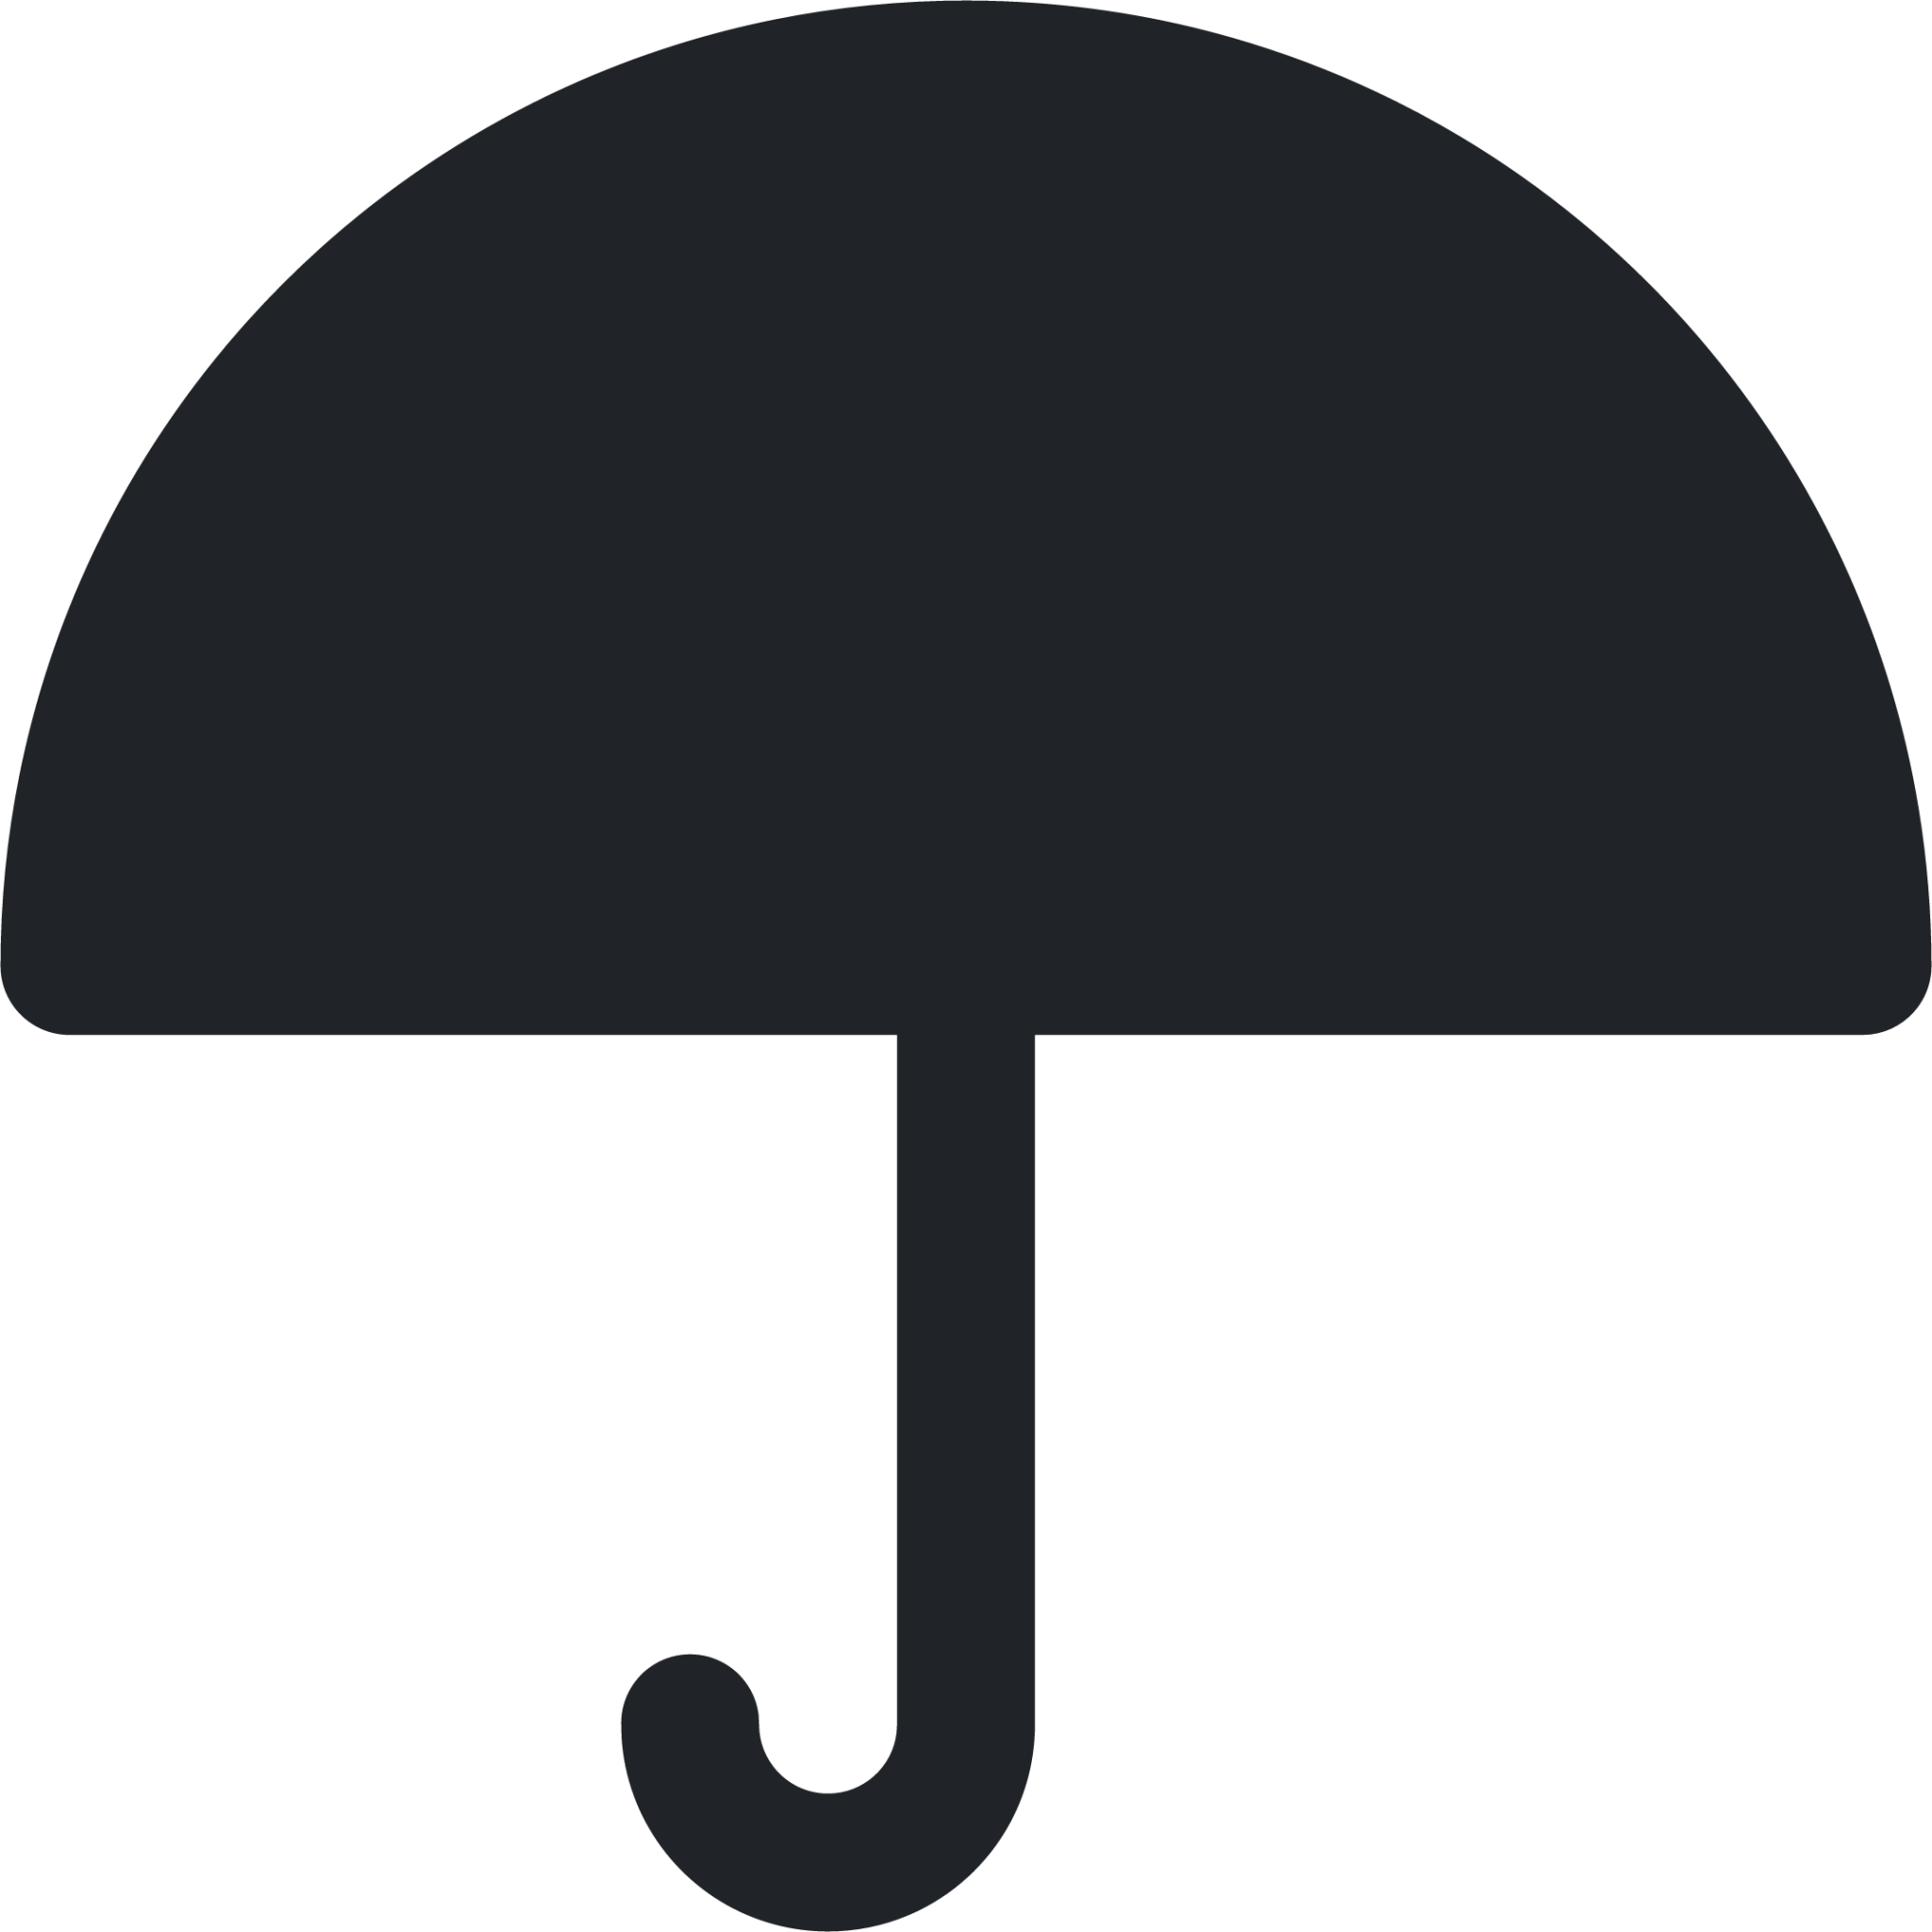 umbrella (rounded filled) icon